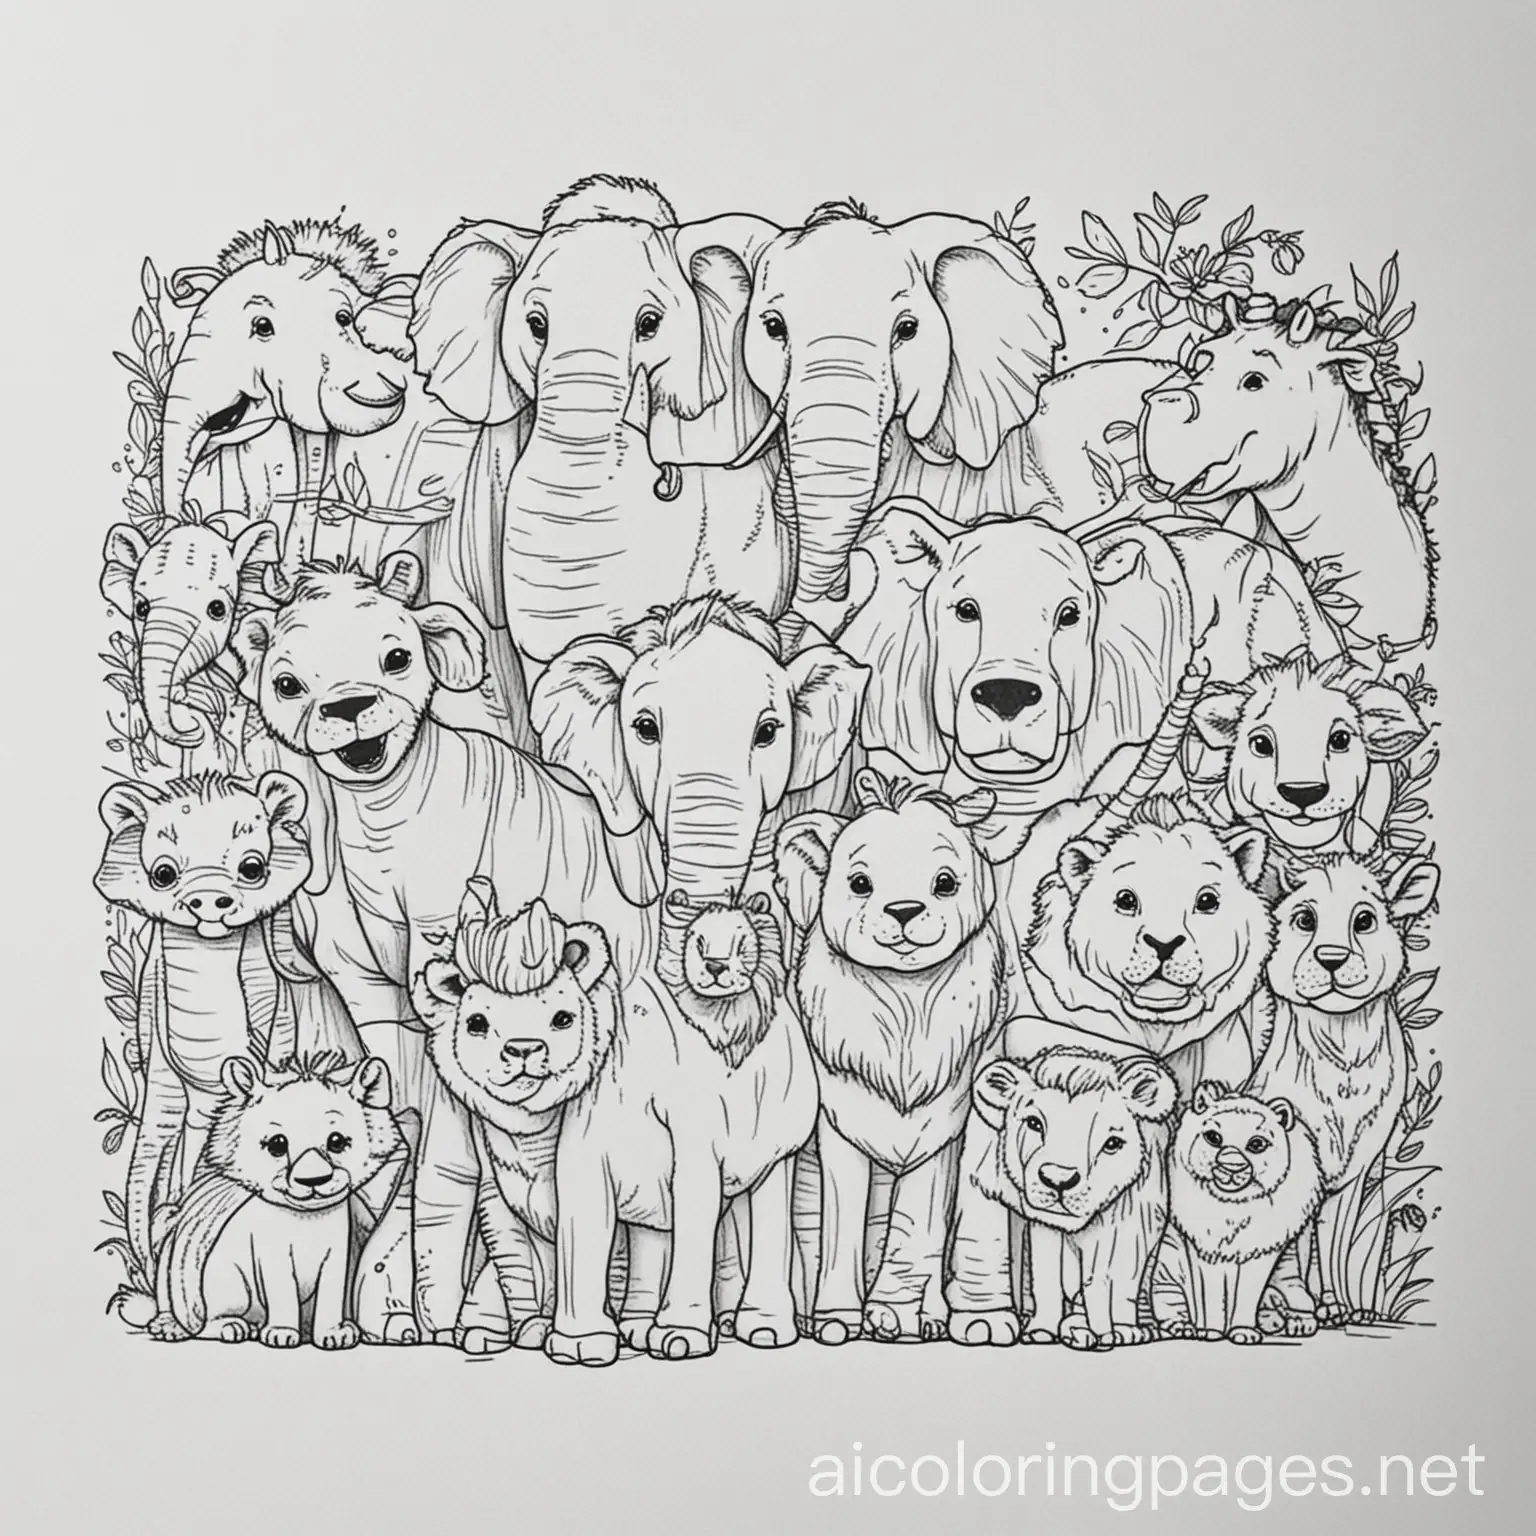 Adorable-Zoo-Animals-Coloring-Page-Simple-Line-Art-for-Easy-Coloring